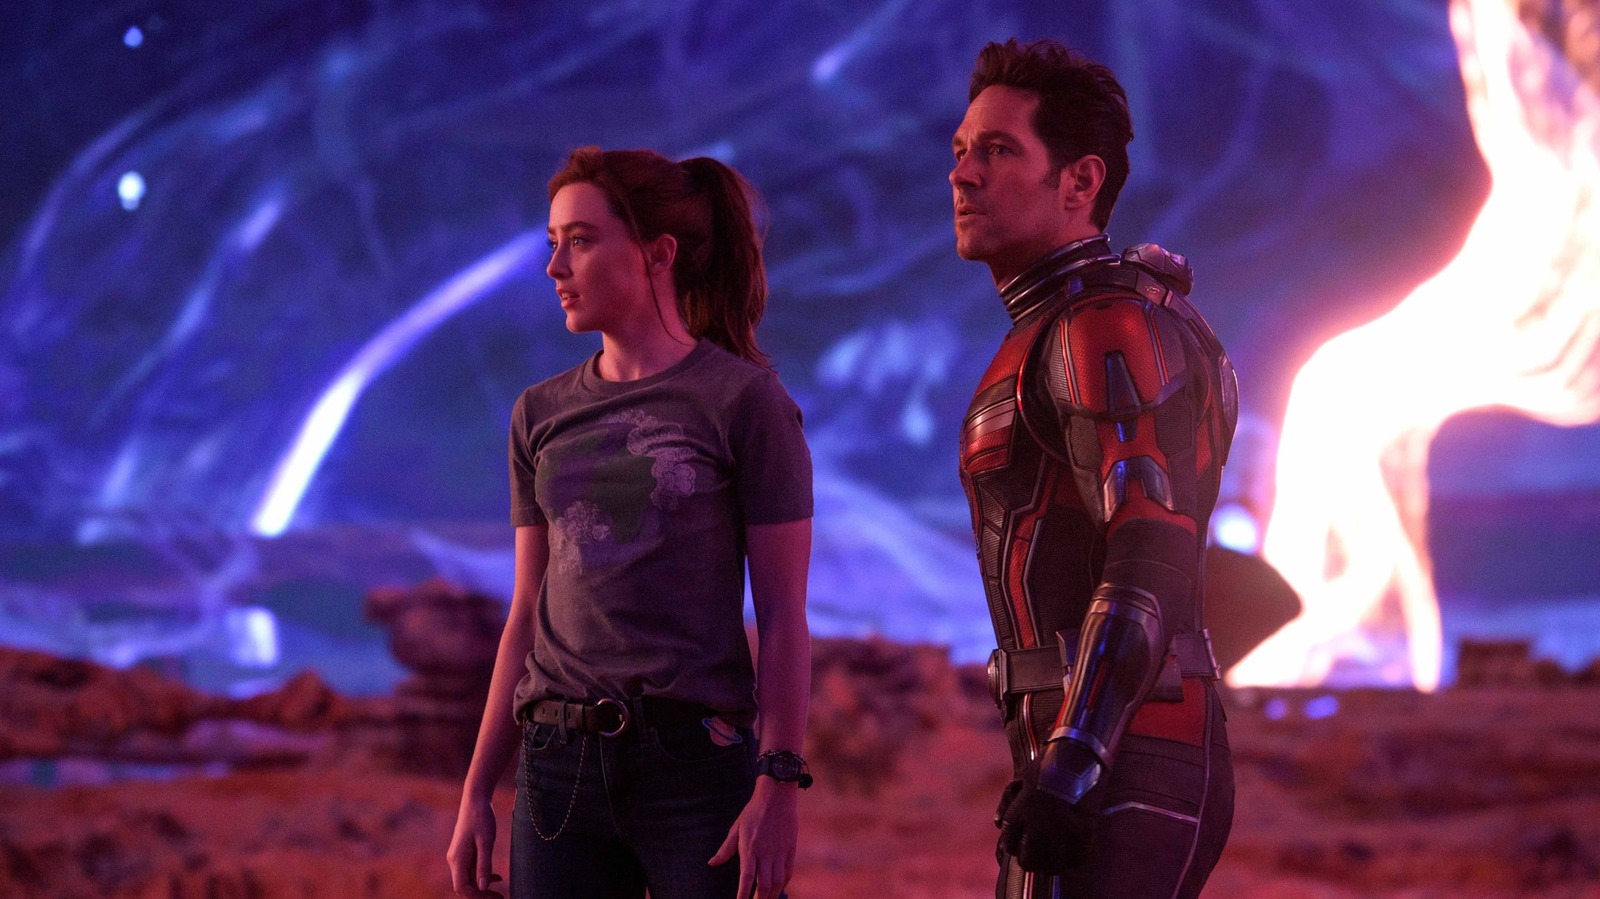 New Ant-Man 3 Featurette Teases Mystery in the Quantum Realm